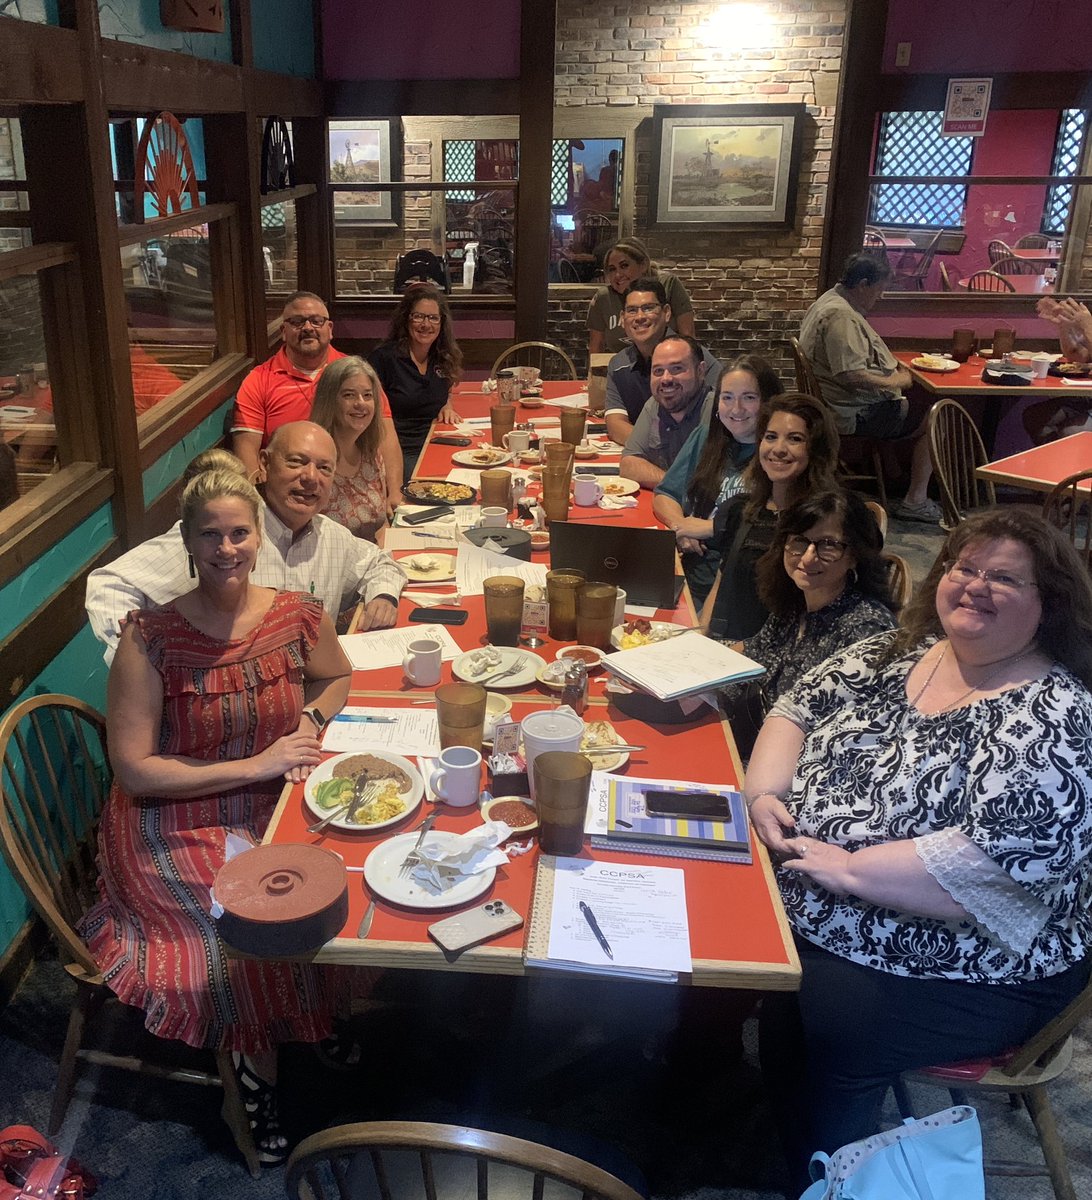 Shout out to the new president Carolyn Bence, Dr. Silva and new CCPSA board for working together to plan the upcoming CCPSA breakfast …details coming soon to our members 👍🏻❤️@ccpsa @rasilva60